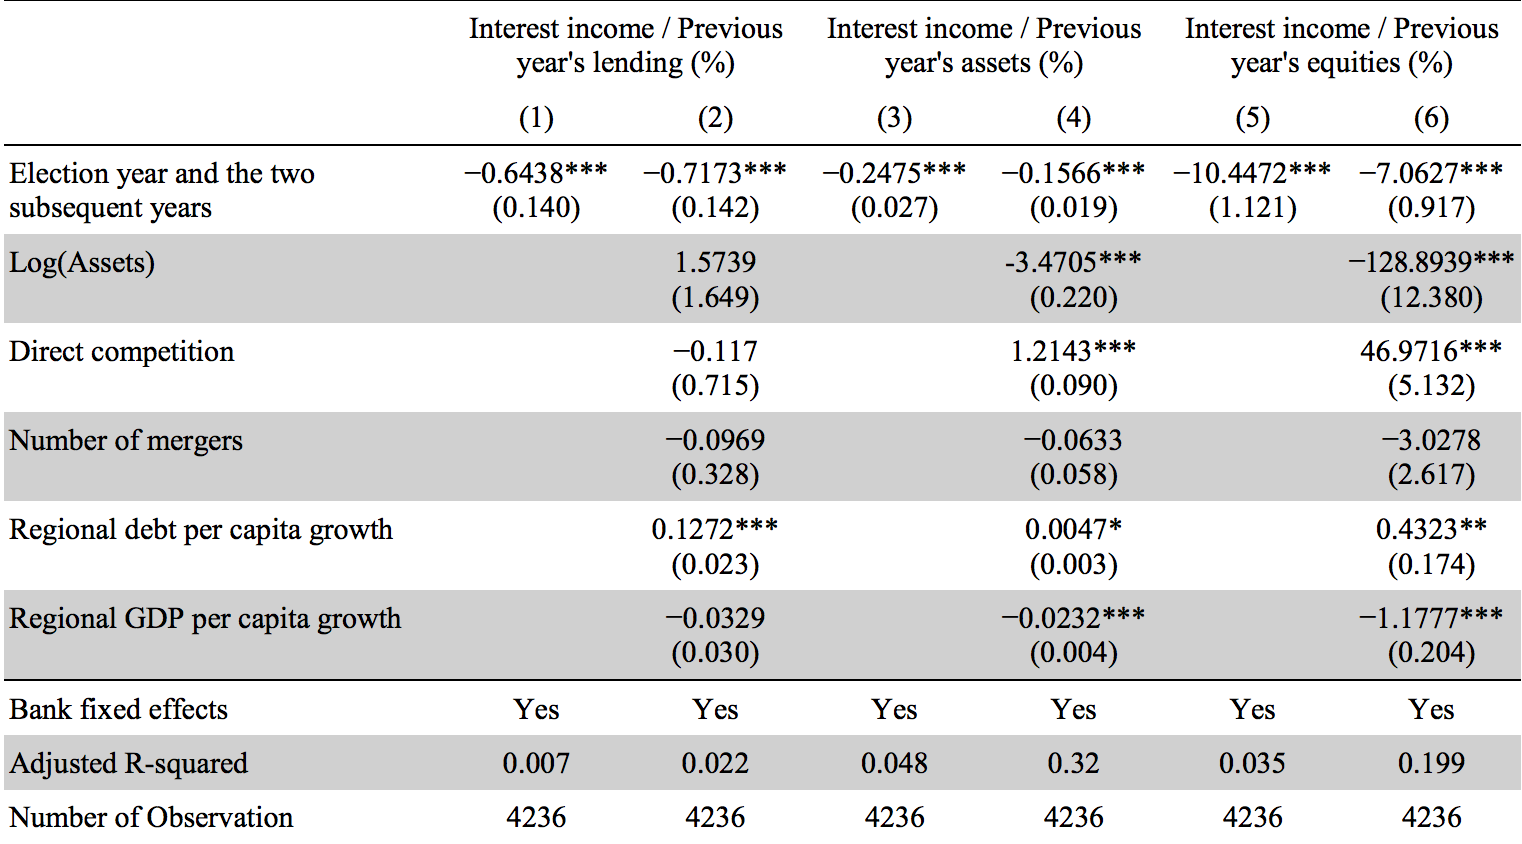 Table 5: Political lending’s effect on banks’ interest income